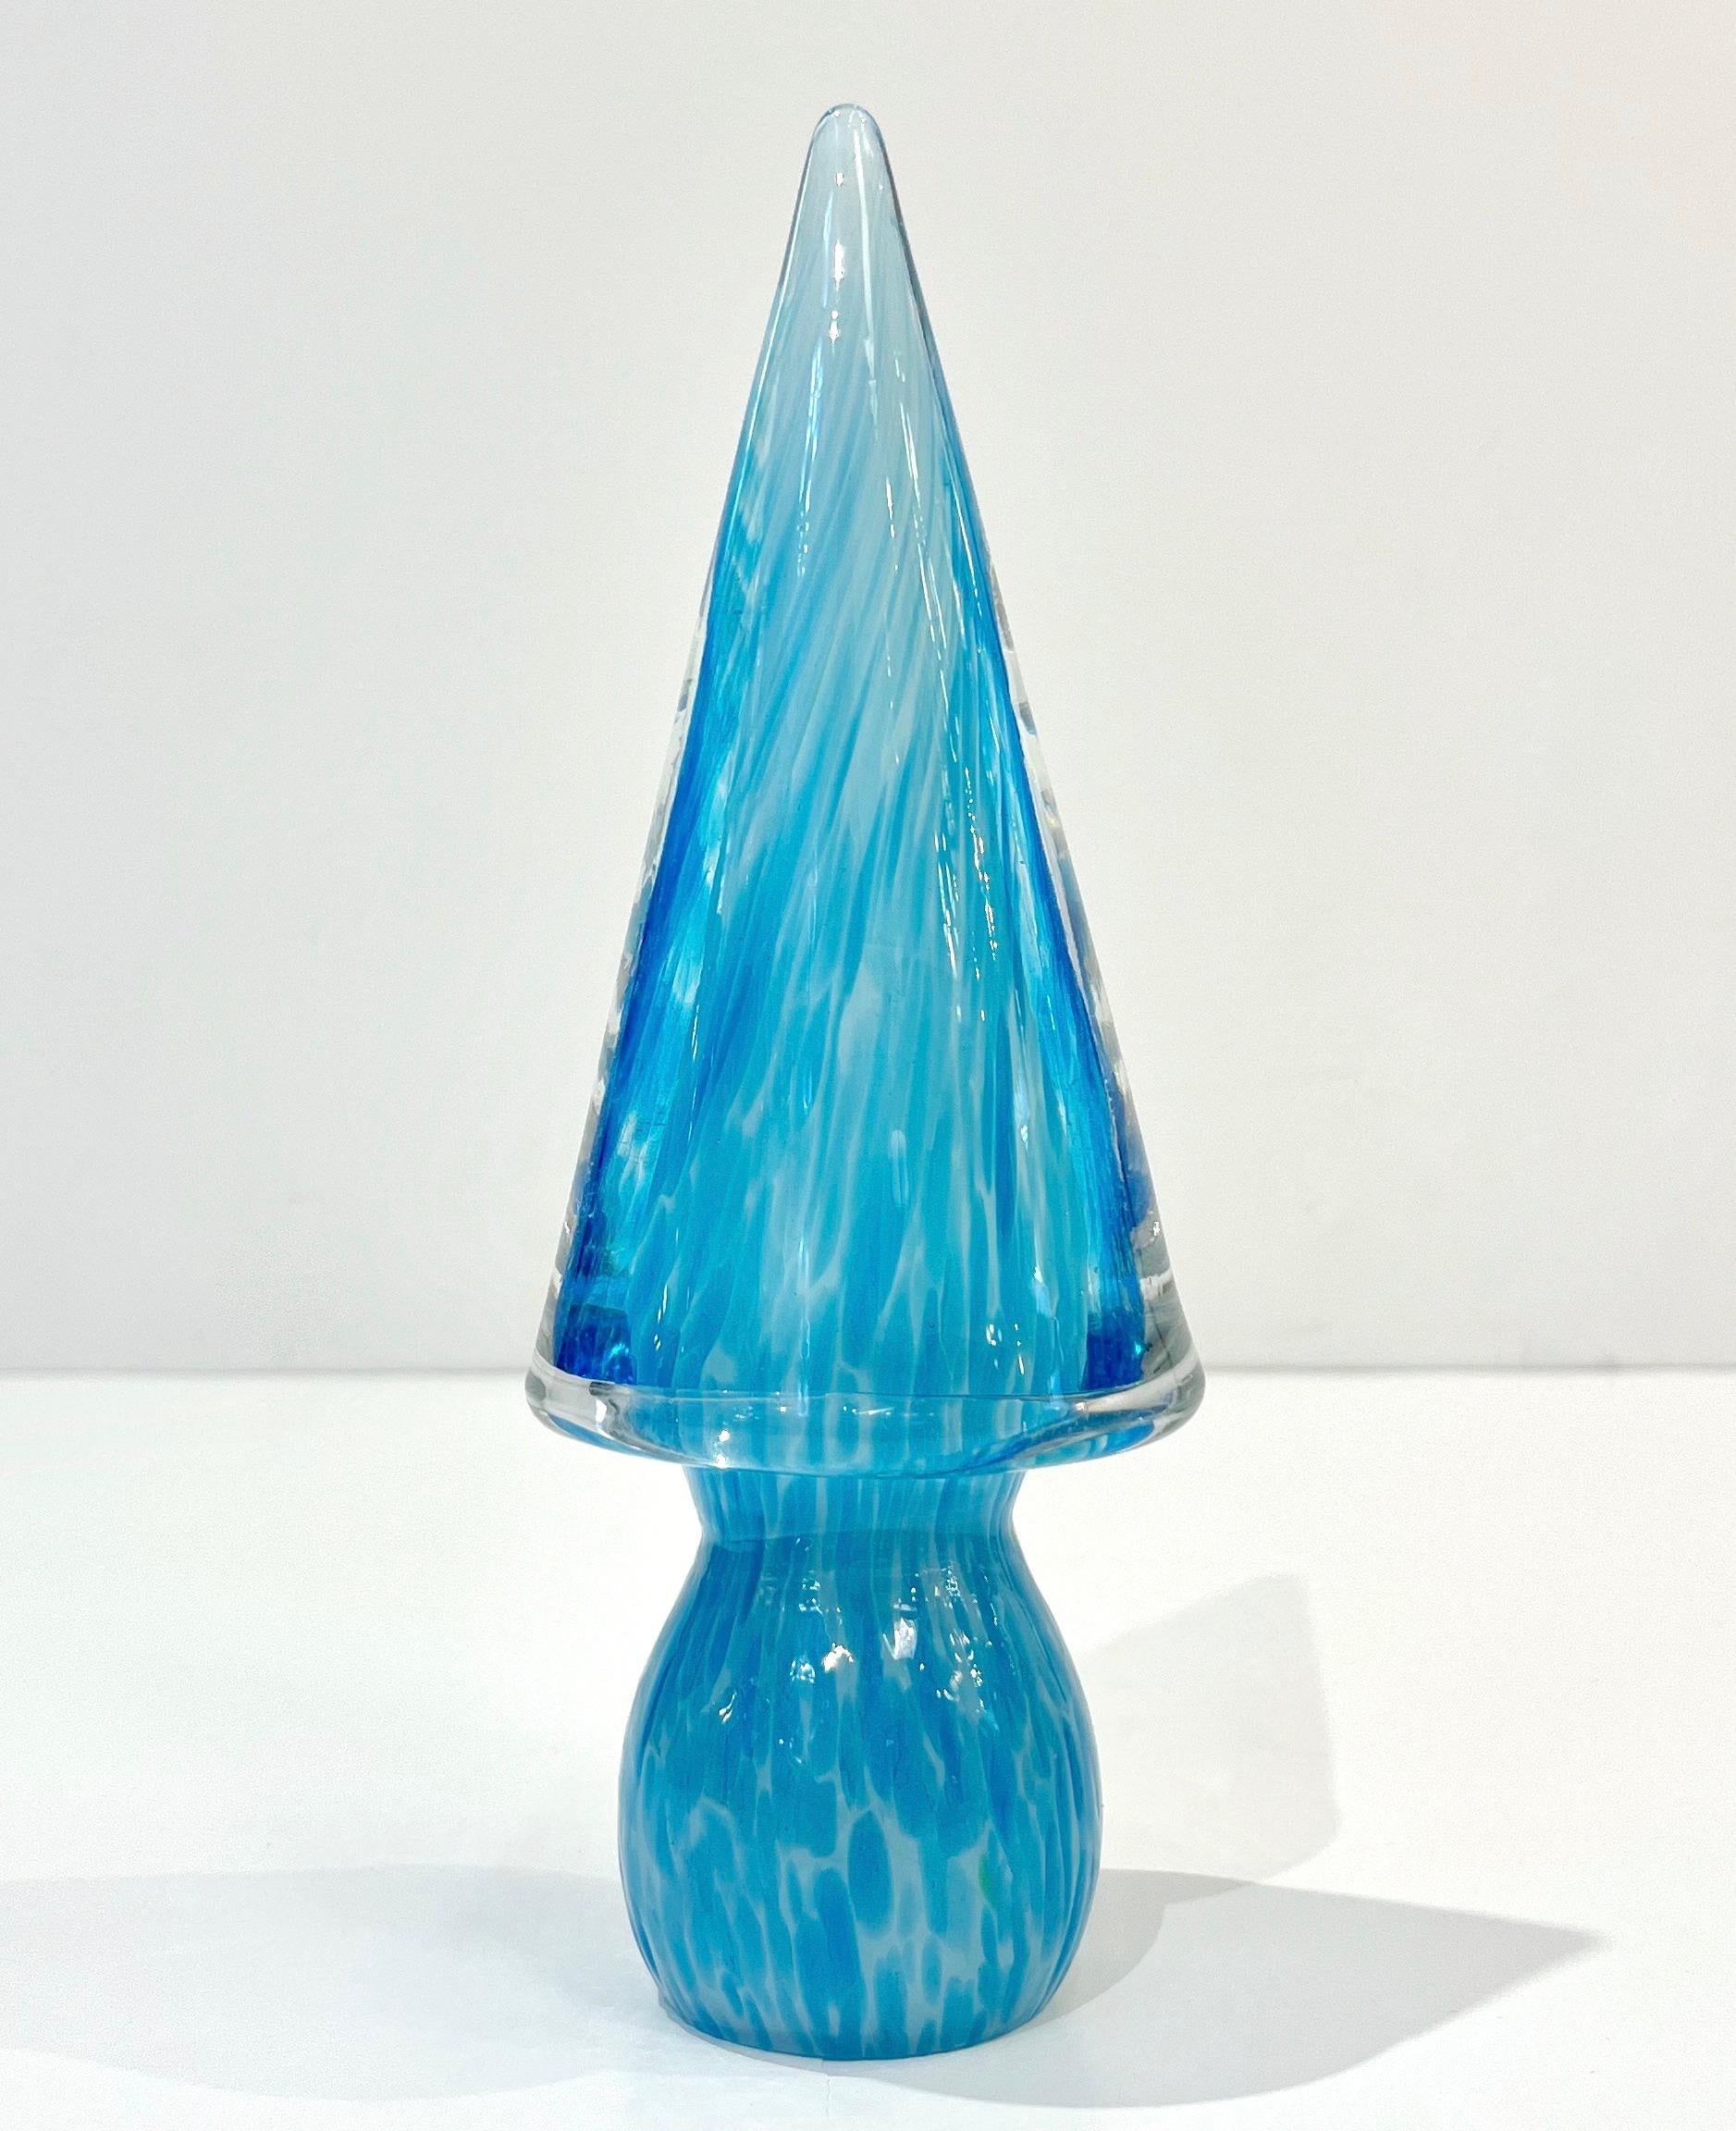 Formia 1980s Italian Vintage Turquoise Blue & White Murano Glass Tree Sculpture For Sale 5